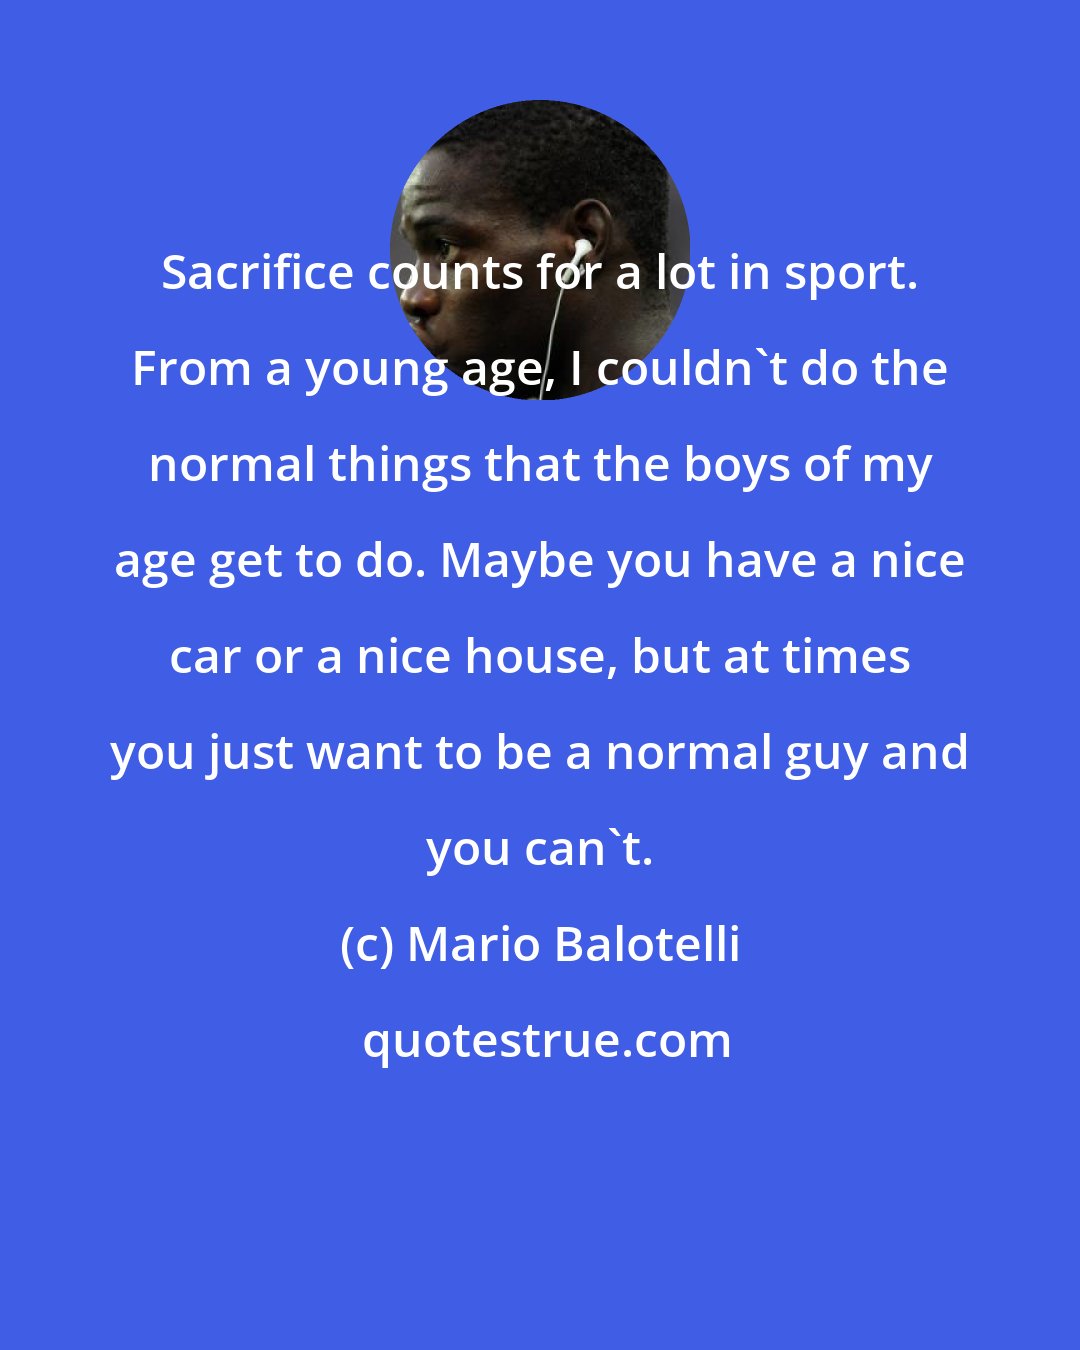 Mario Balotelli: Sacrifice counts for a lot in sport. From a young age, I couldn't do the normal things that the boys of my age get to do. Maybe you have a nice car or a nice house, but at times you just want to be a normal guy and you can't.